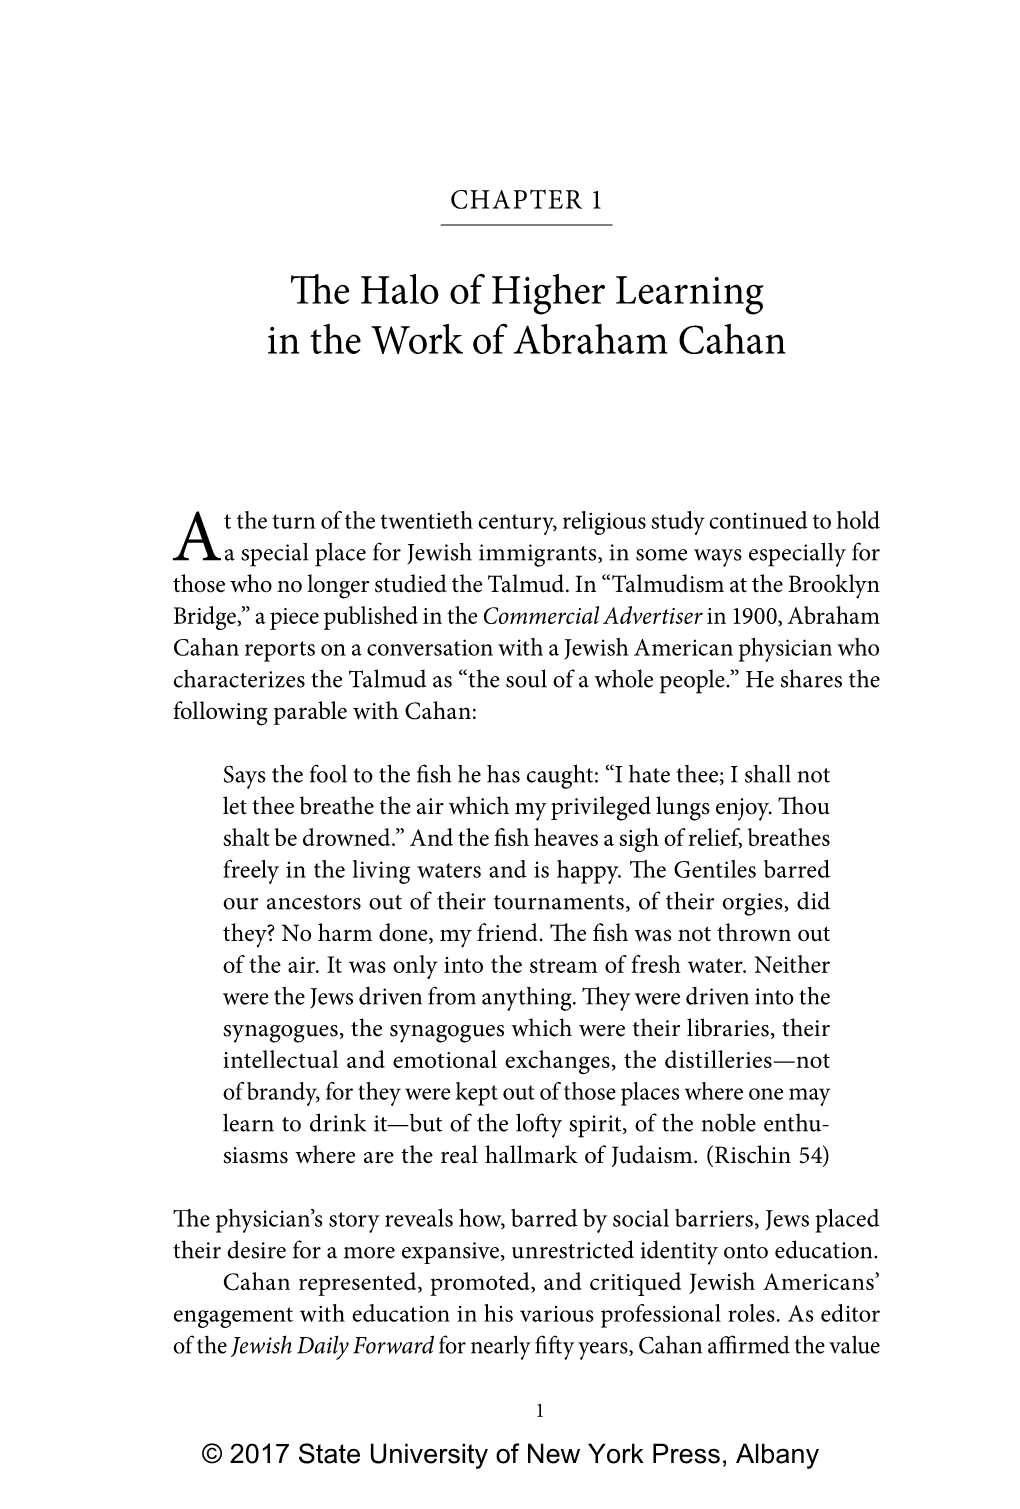 The Halo of Higher Learning in the Work of Abraham Cahan